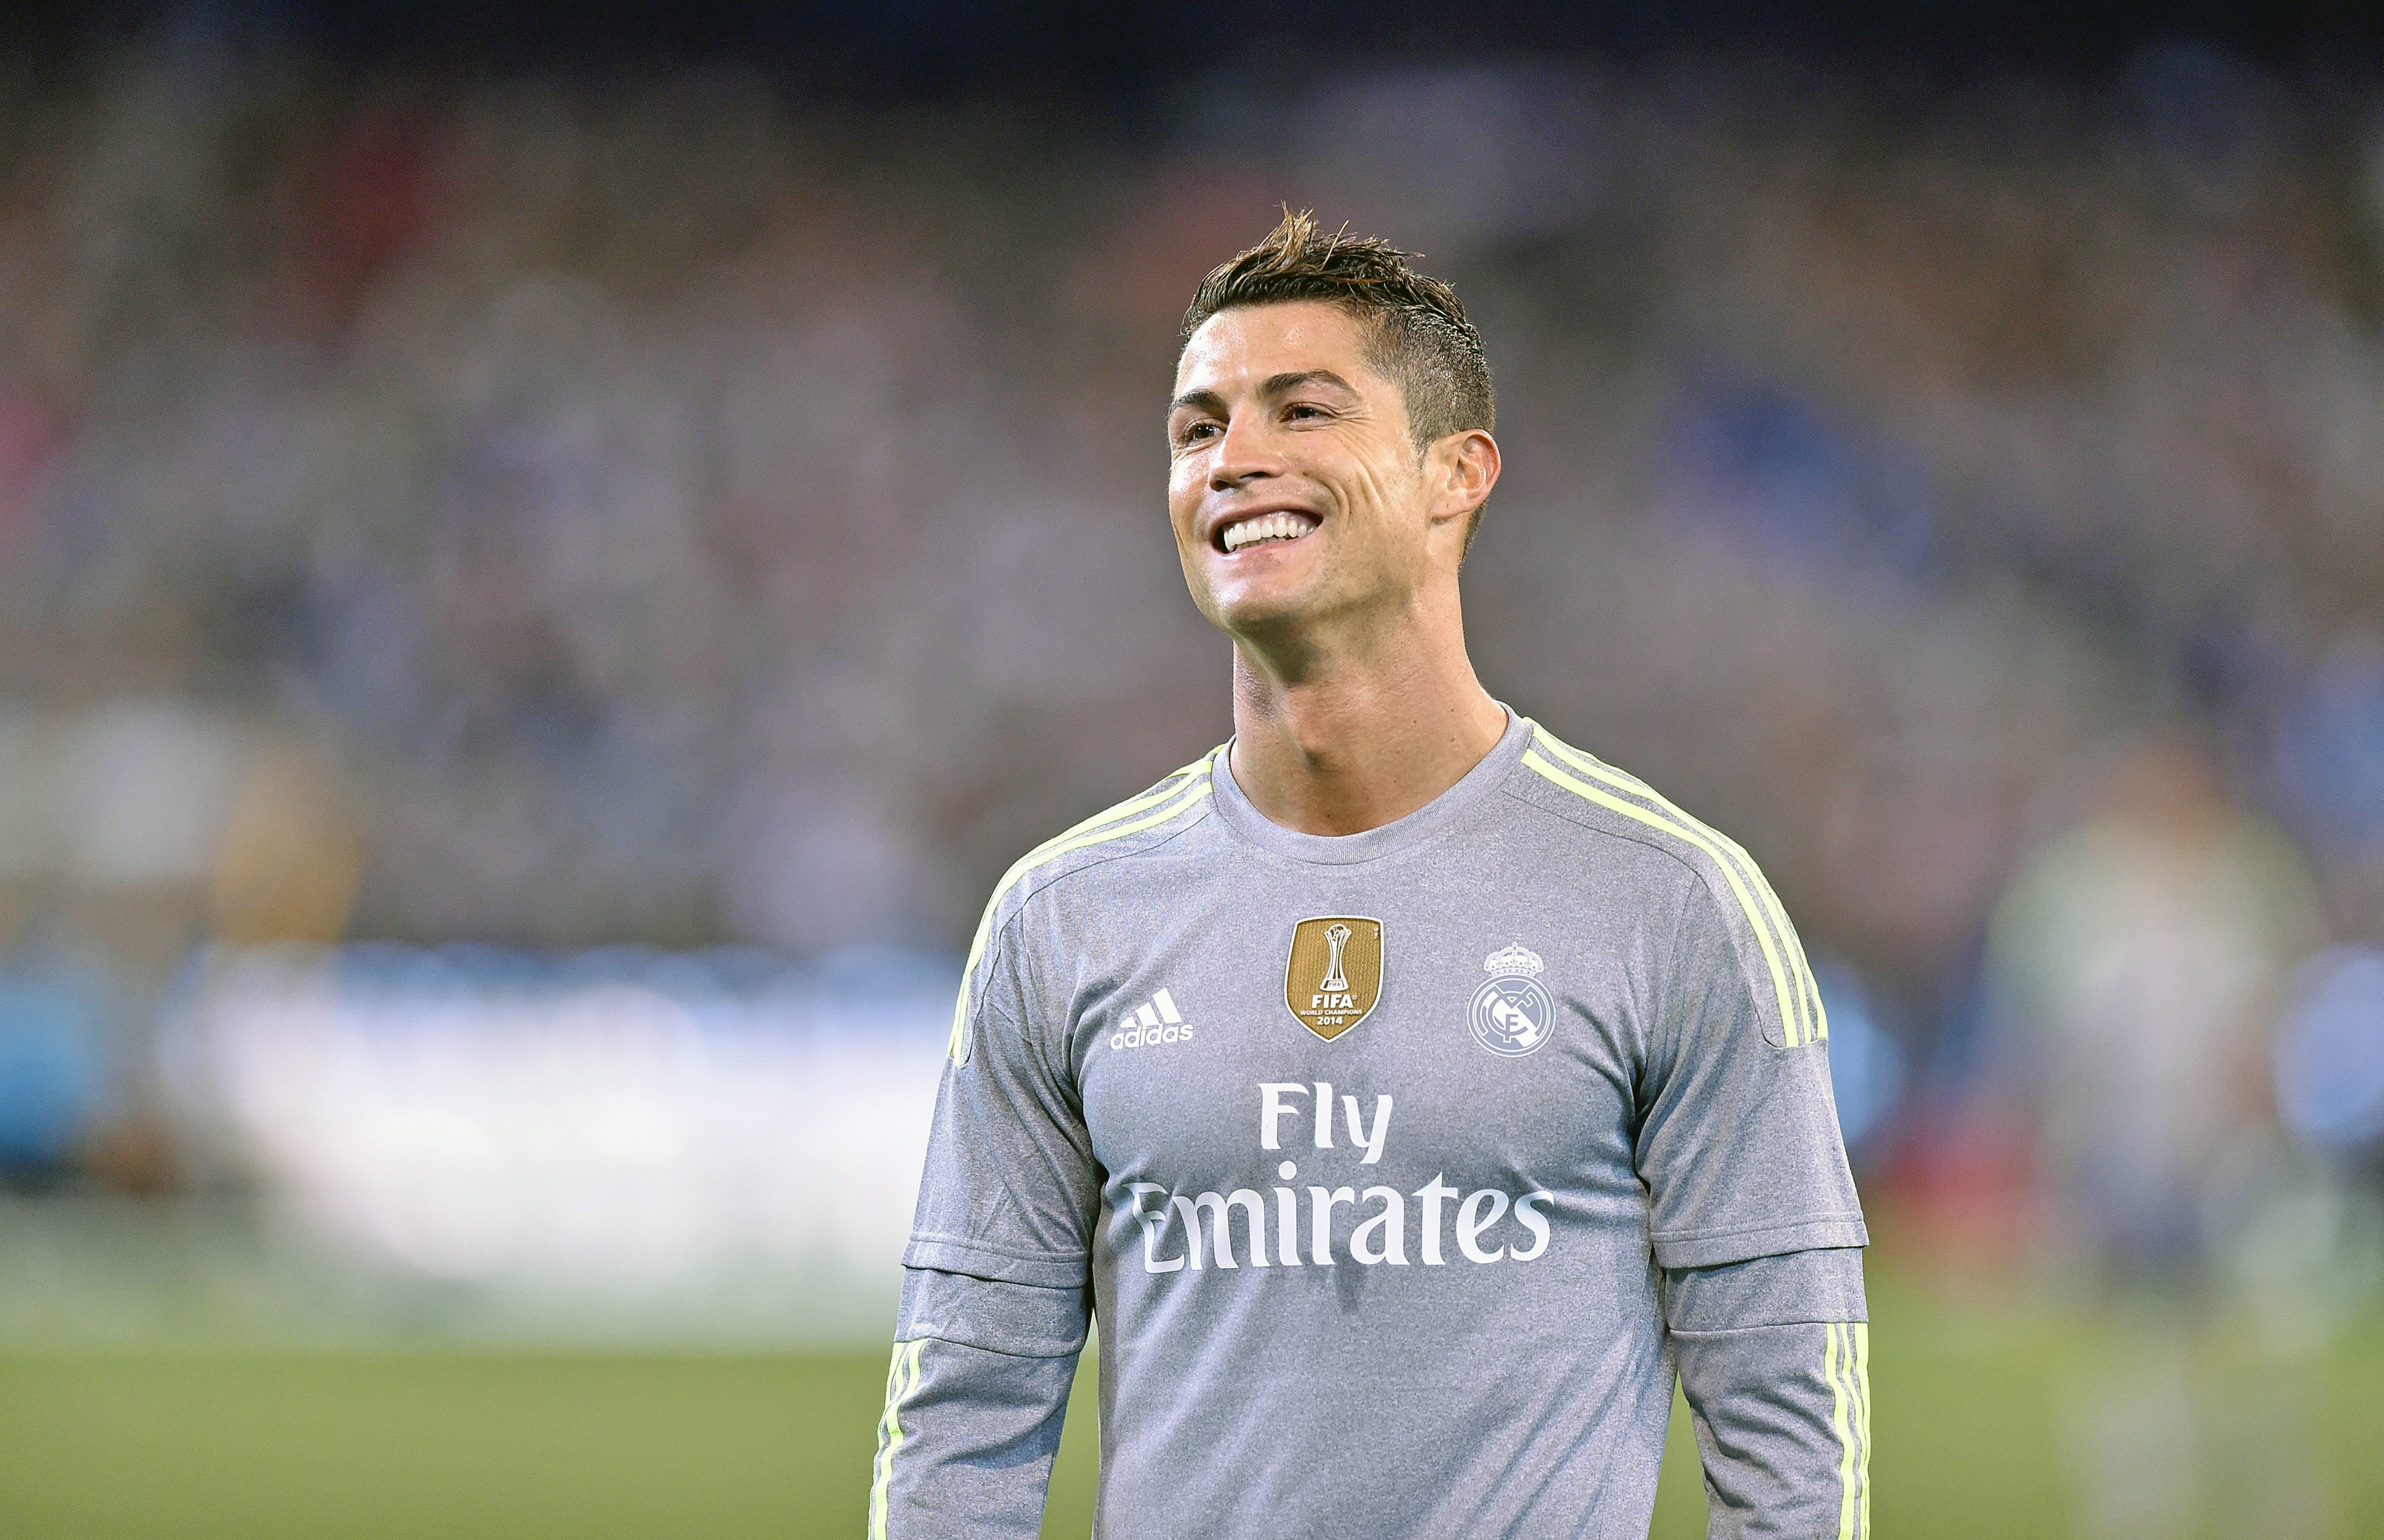 "Cristiano will play as a striker if necessary. If not, he’ll play out wide and cut in to score goals."